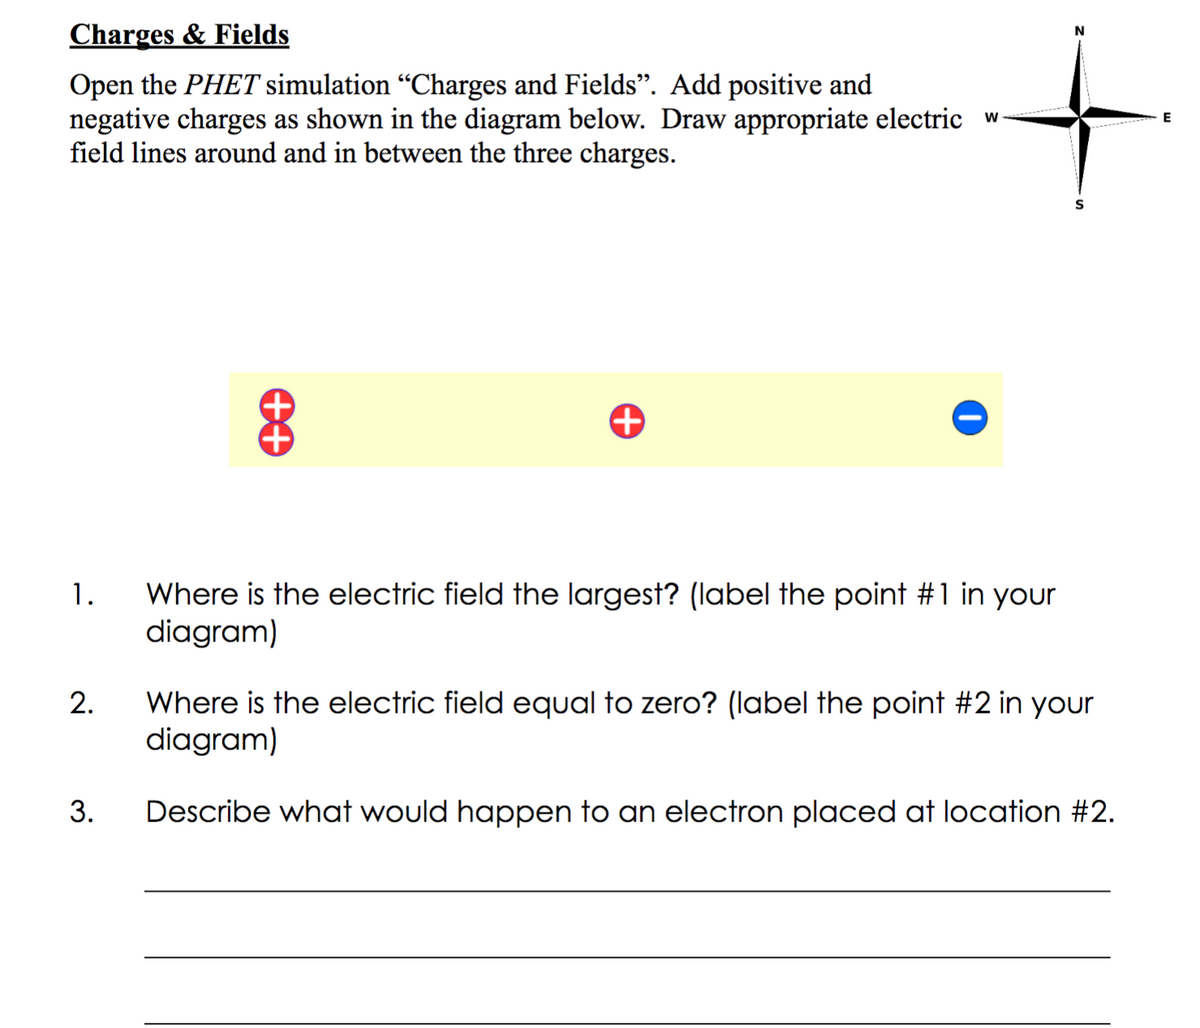 Charges & Fields
Open the PHET simulation “Charges and Fields". Add positive and
negative charges as shown in the diagram below. Draw appropriate electric w-
field lines around and in between the three charges.
Where is the electric field the largest? (label the point #1 in your
diagram)
1.
Where is the electric field equal to zero? (label the point #2 in your
diagram)
2.
3.
Describe what would happen to an electron placed at location #2.
